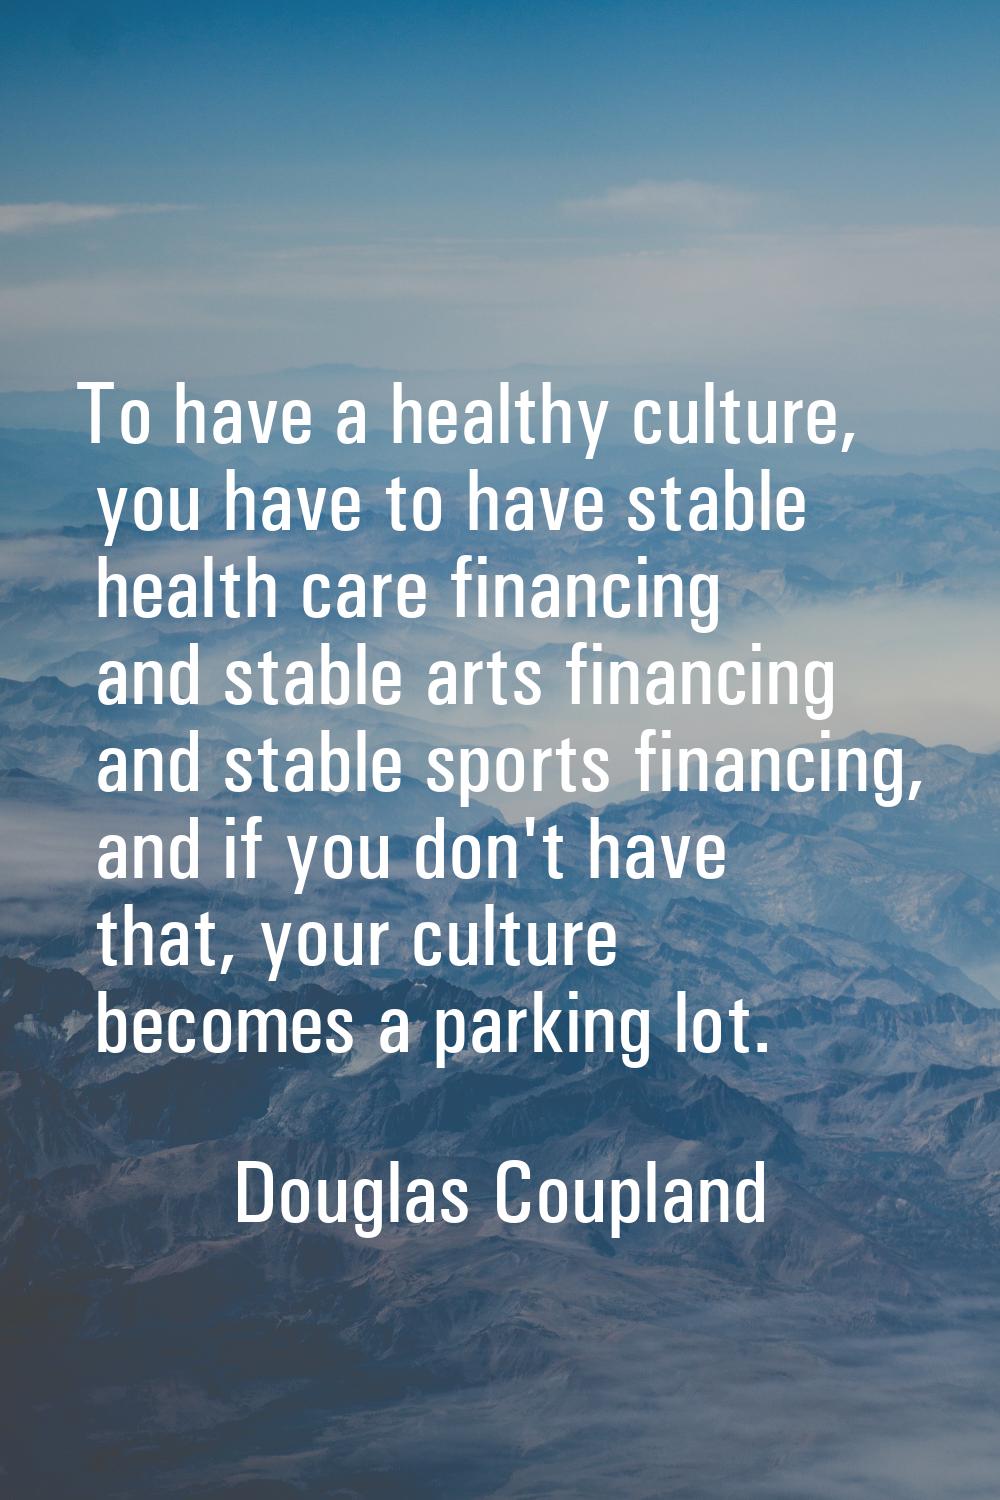 To have a healthy culture, you have to have stable health care financing and stable arts financing 